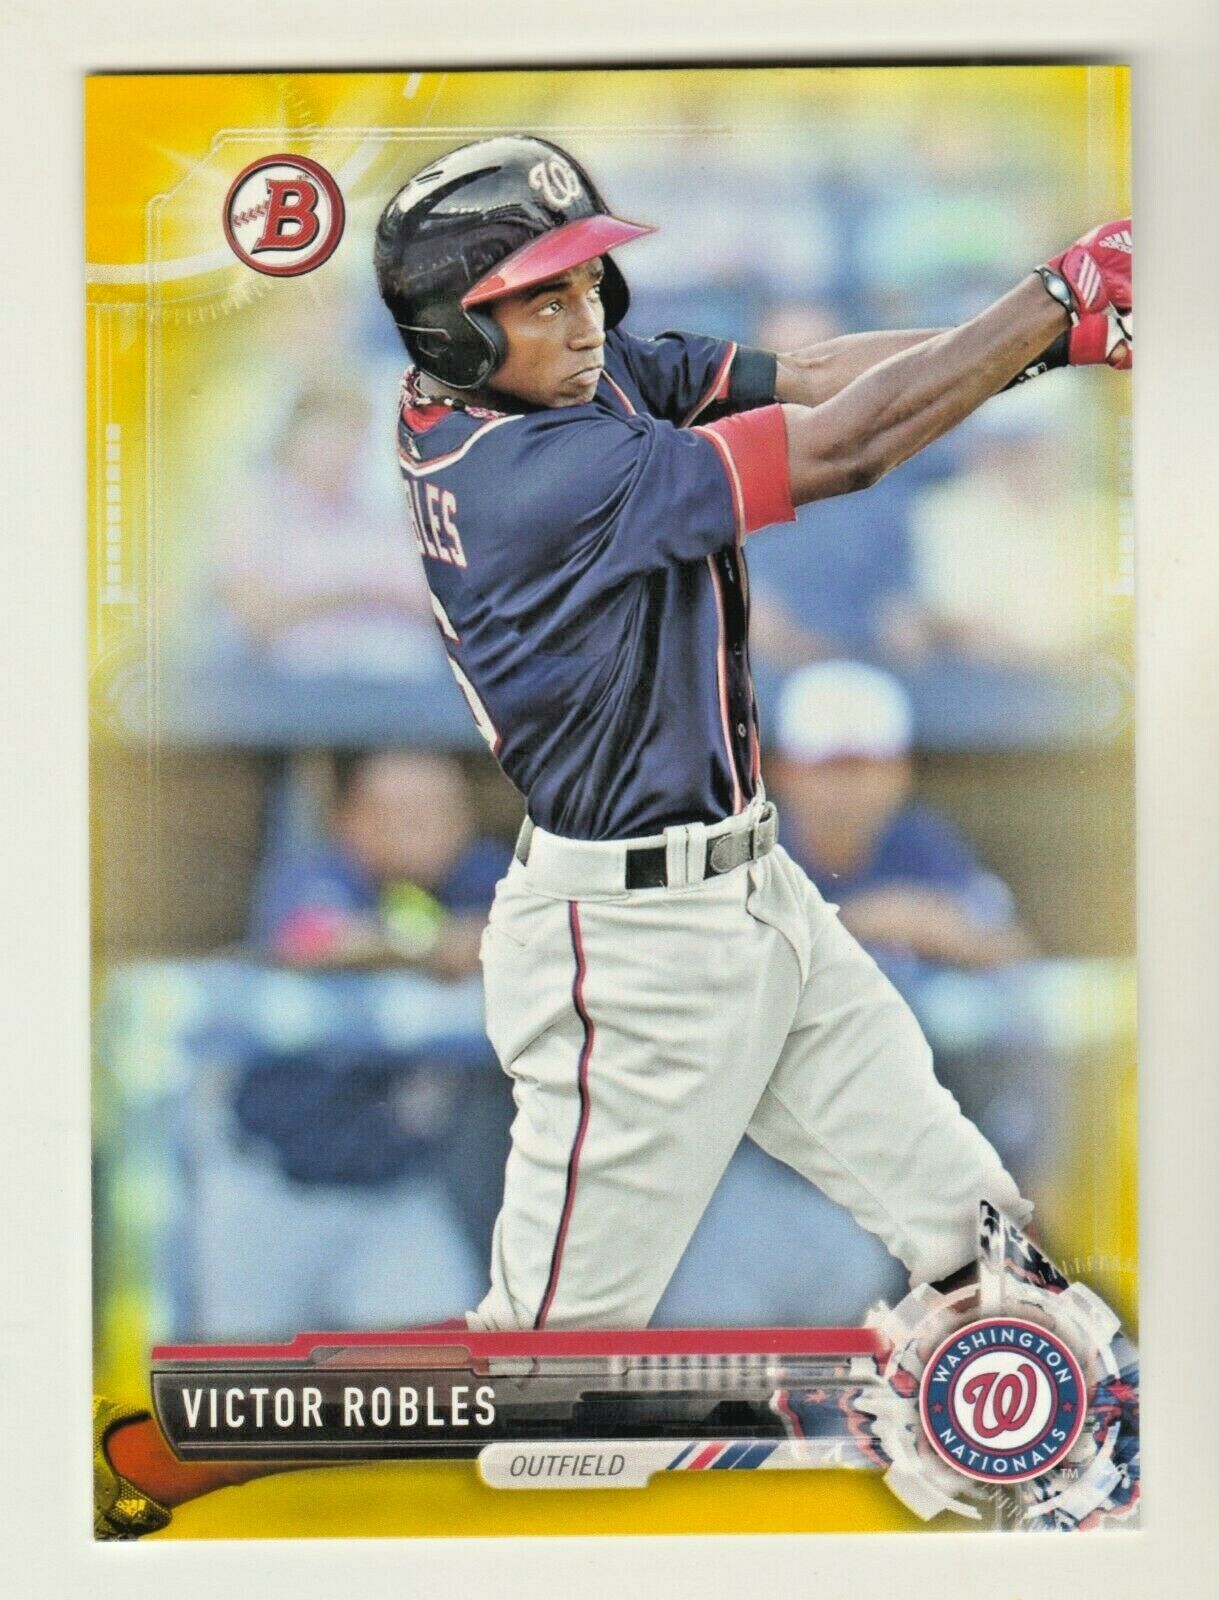 2017 Bowman YELLOW PARALLEL #BP73 VICTOR ROBLES RC Rookie Retail Exclusive